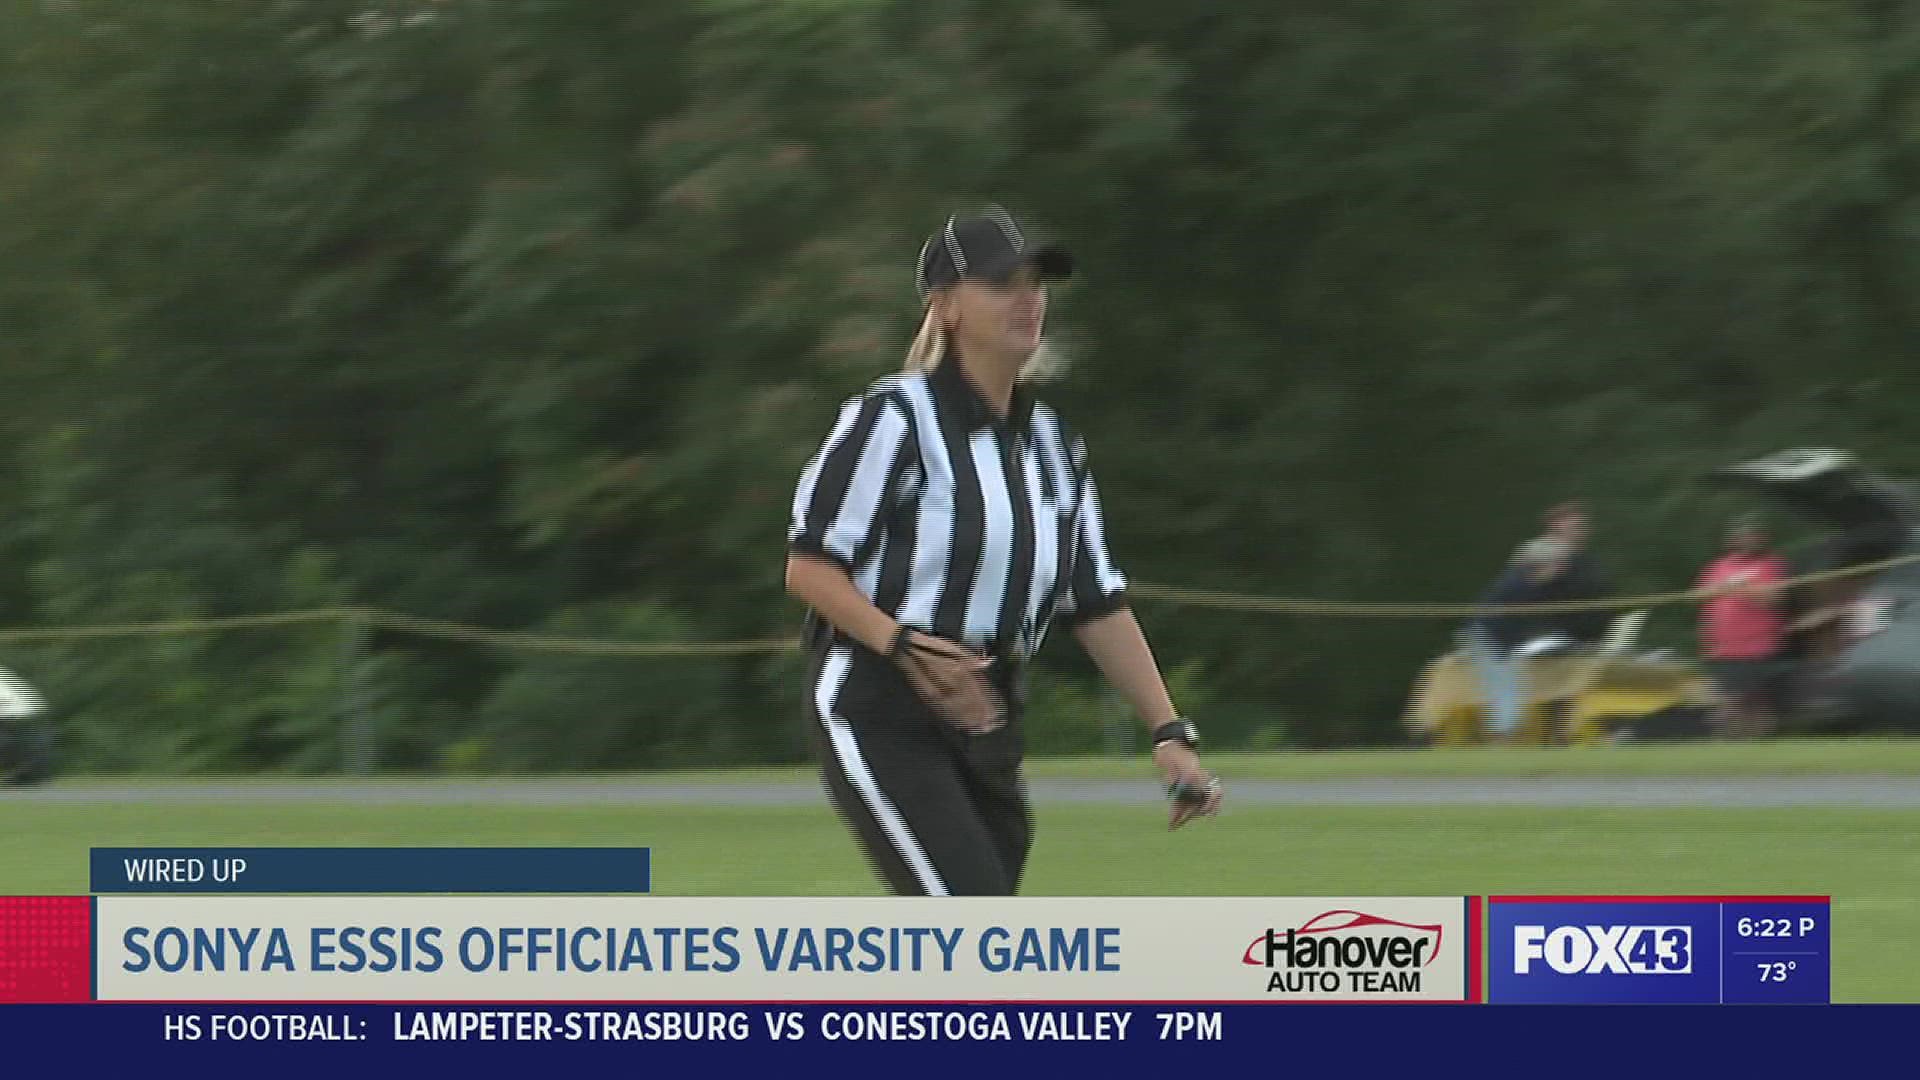 HSFF 'Wired Up' with Sonya Essis who officiates a varsity game.